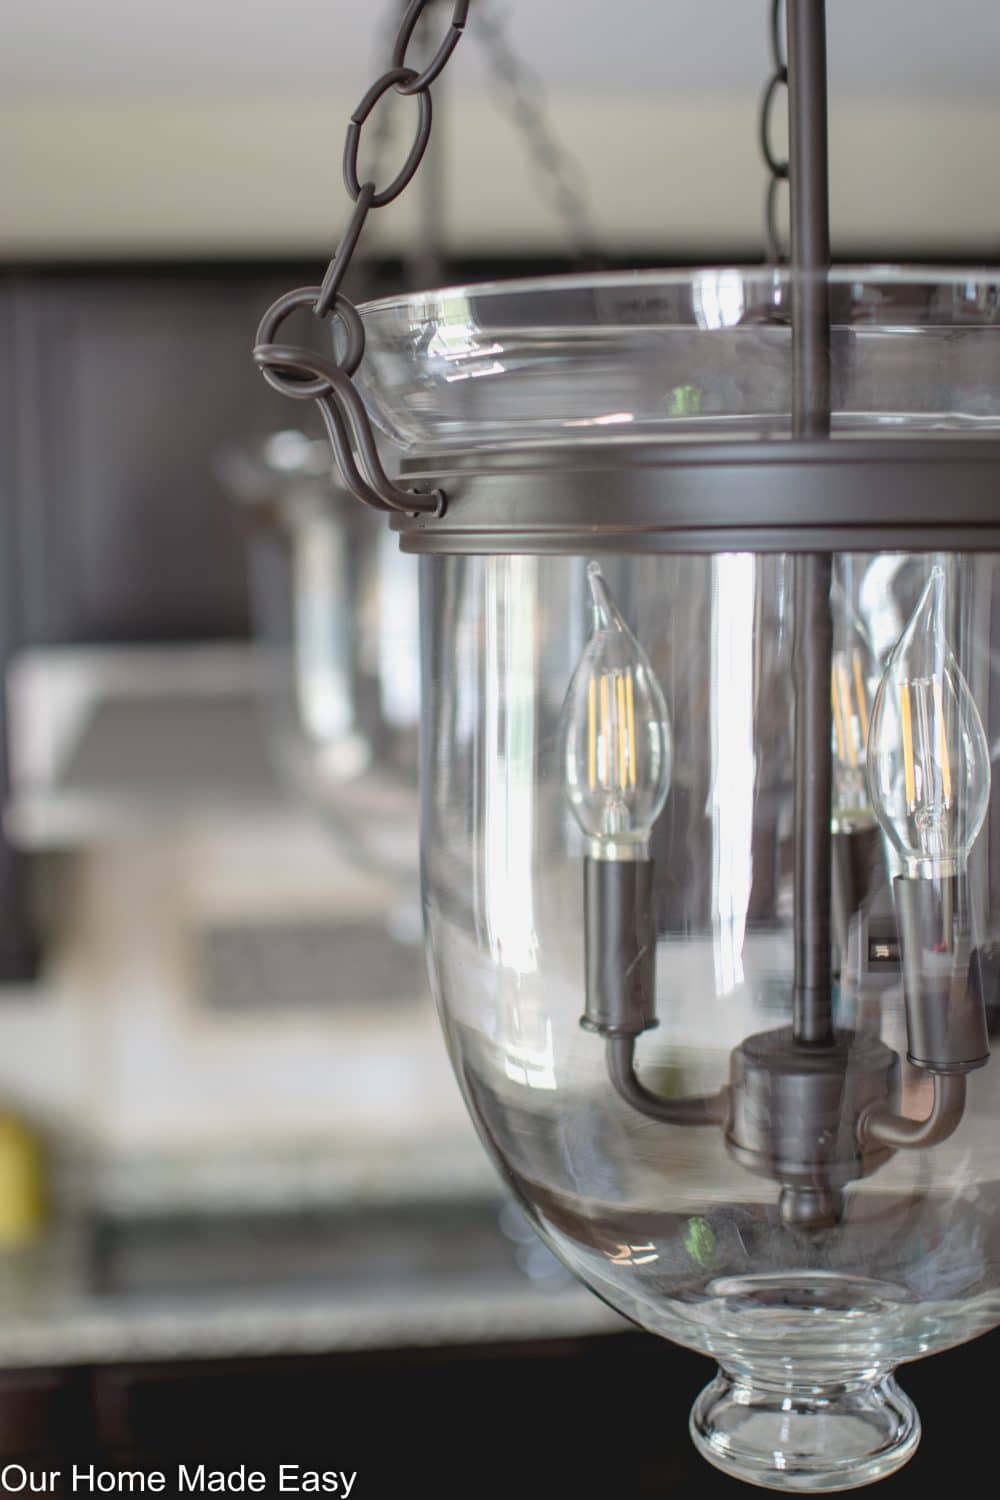 The new kitchen island pendant lighting is bright and clean 